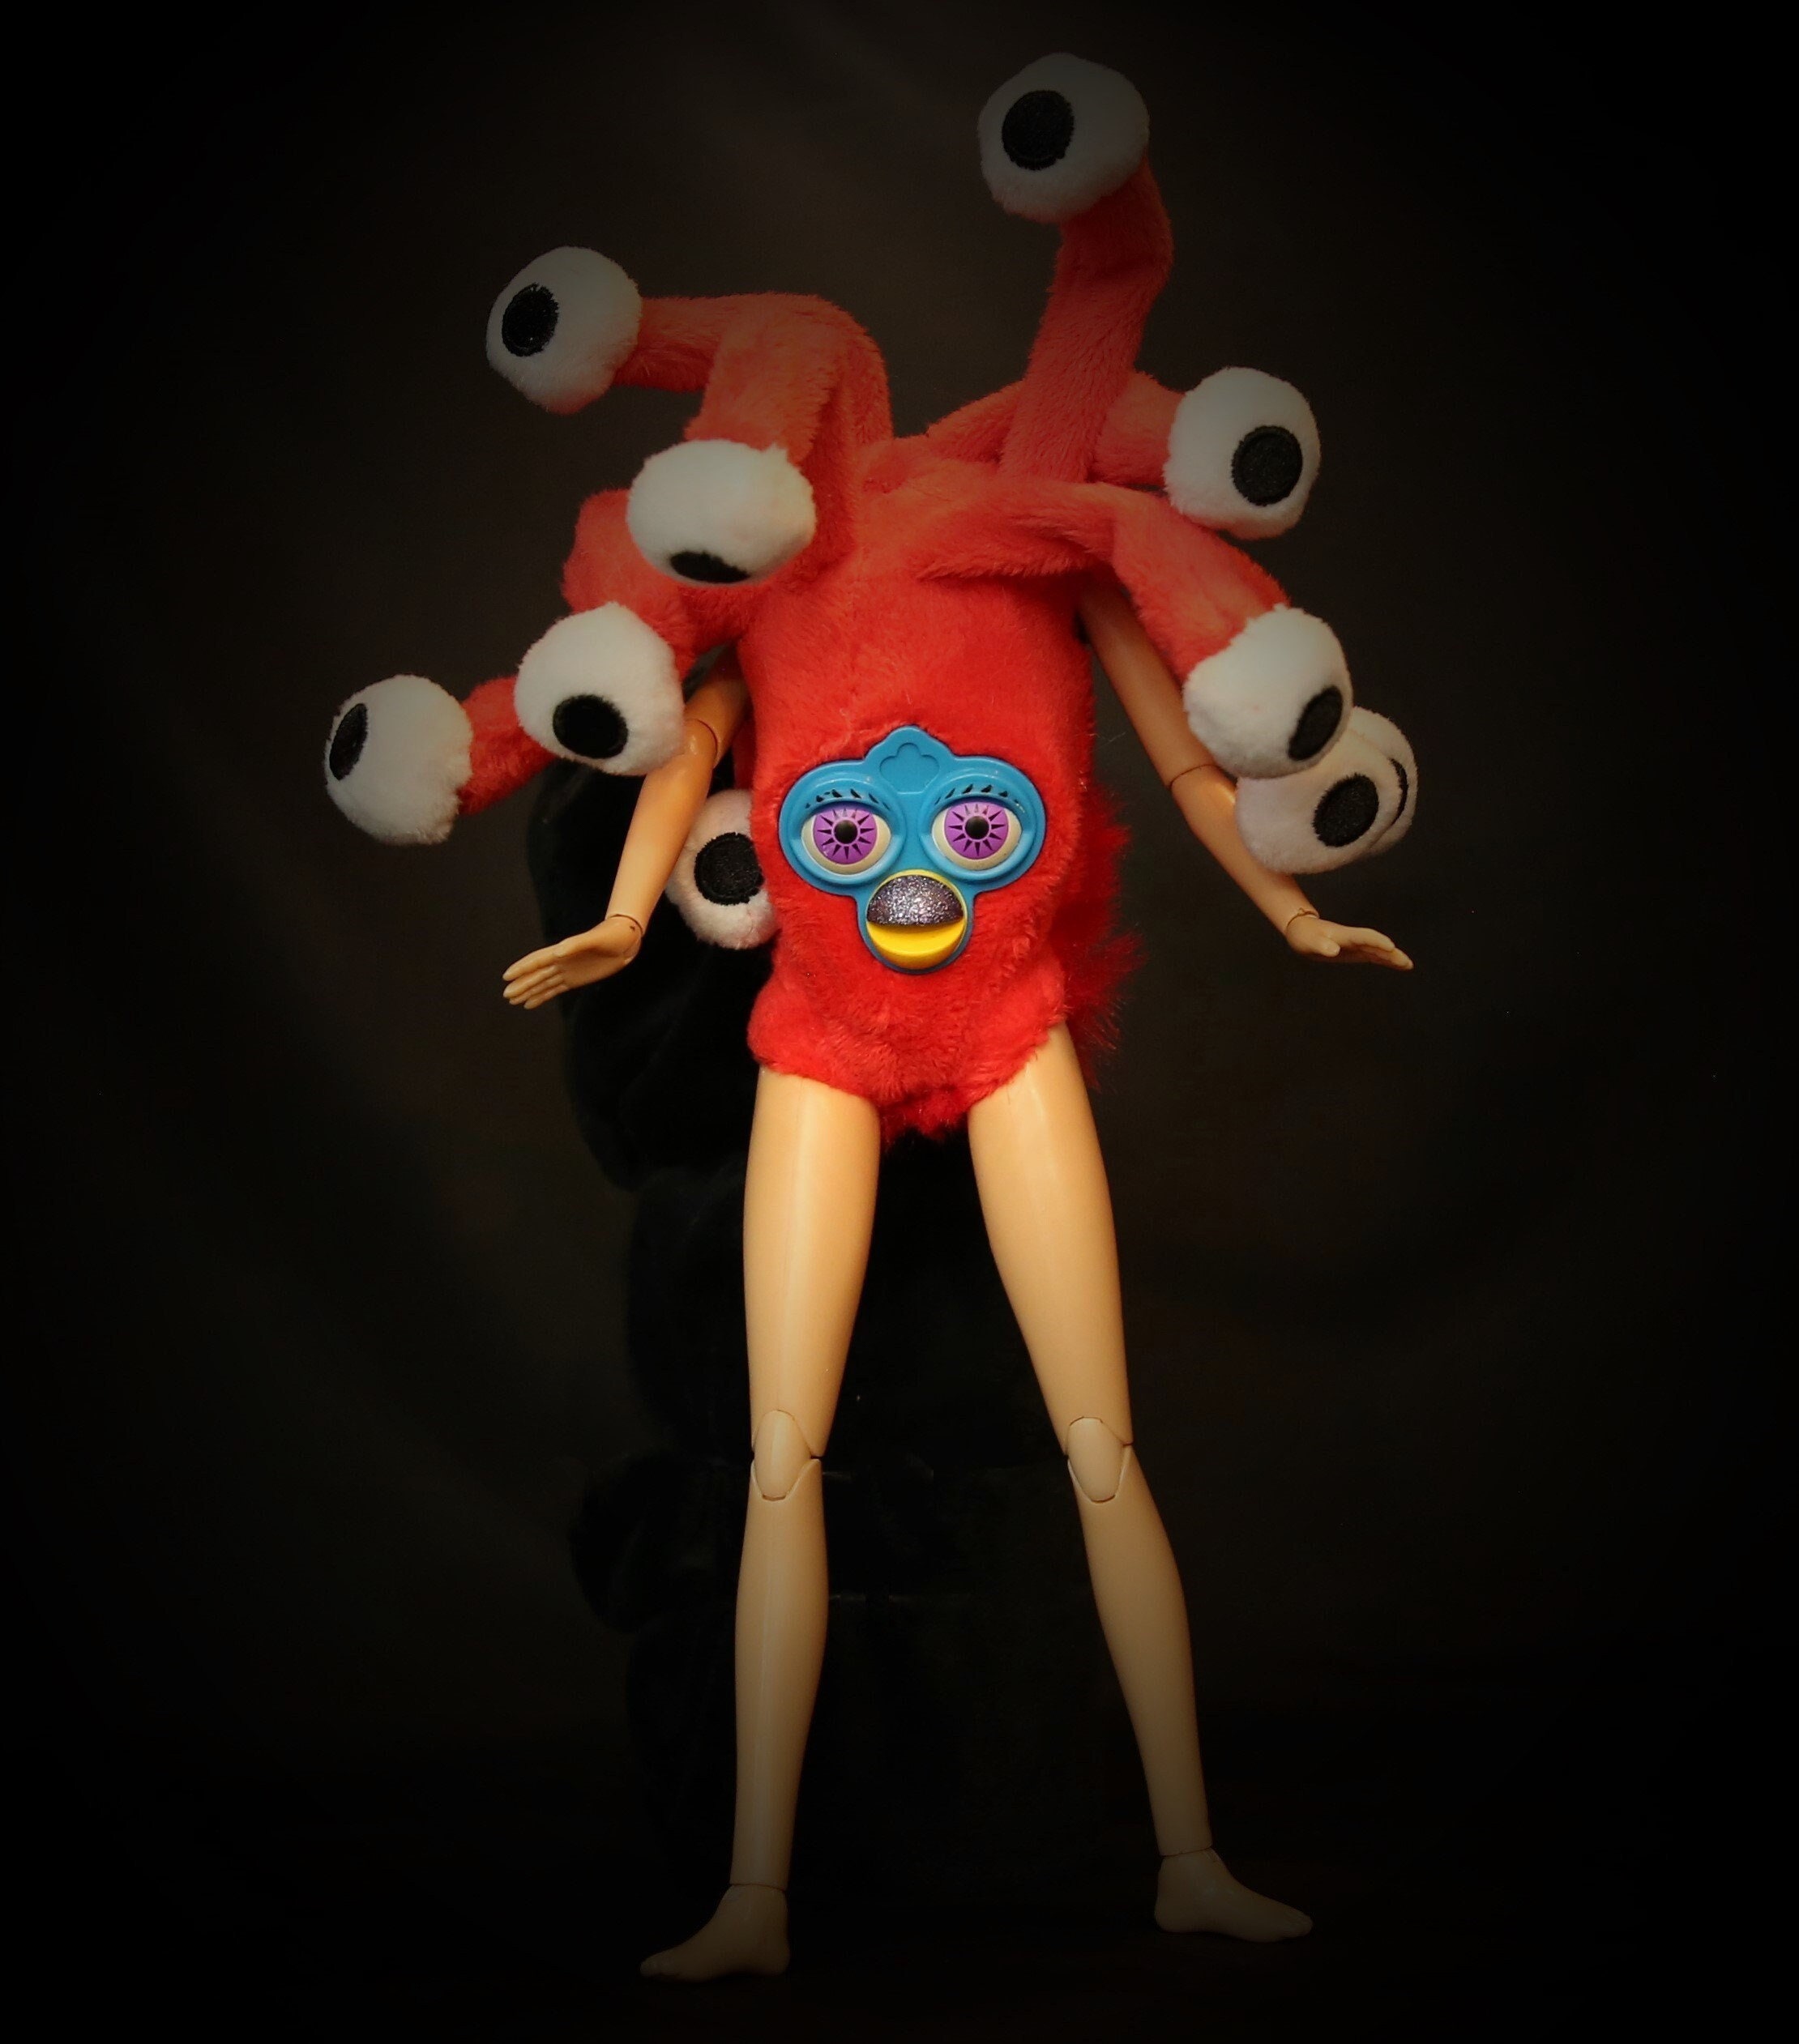 PEET THE PUPPET - My concept Poppy Playtime toy (yes, I was